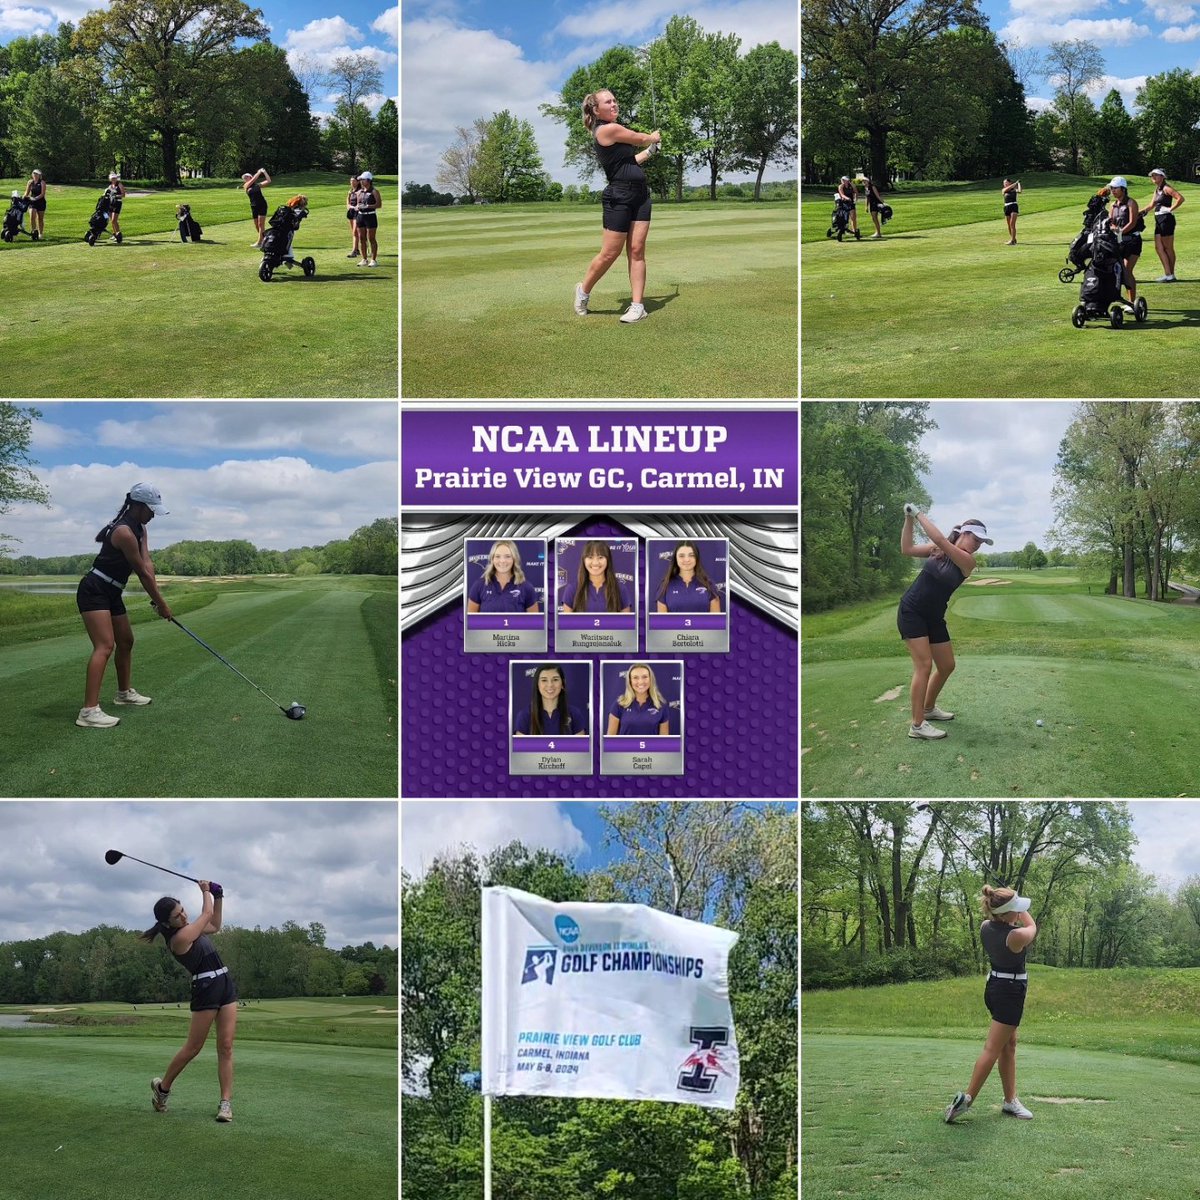 Ladies first! NCAA women's East Regional tees off tomorrow morning, 8:30-9:06 for the Follow us live💜⛳️ results.golfstat.com/public/leaderb… Men begin the NCAA Tournament on Thursday. It's a great week to be a Bearcat!